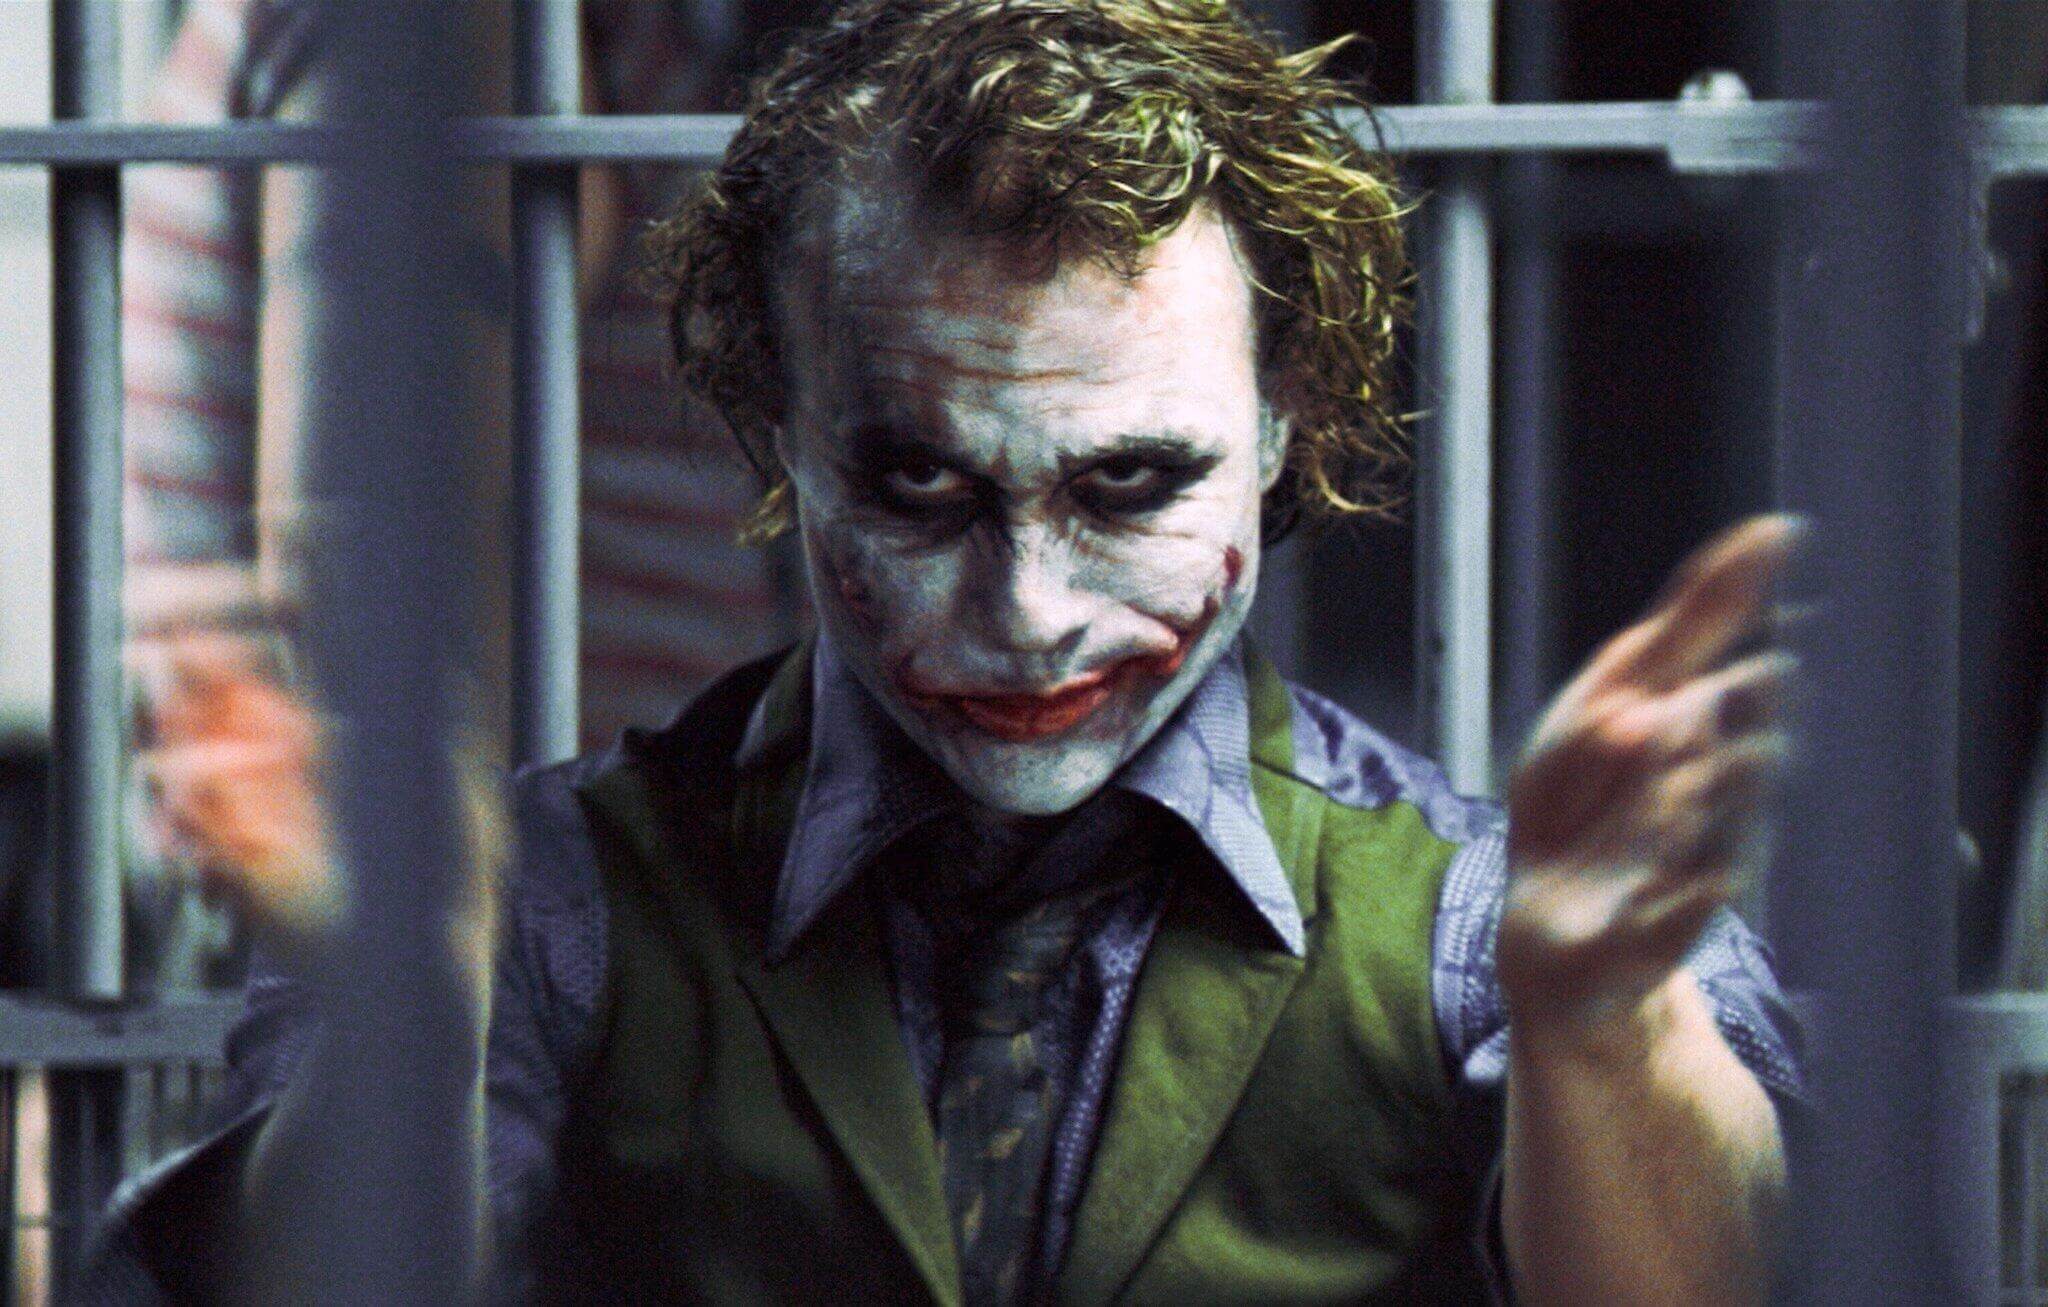 Heath Ledger's iconic line from The Dark Knight movie Lines